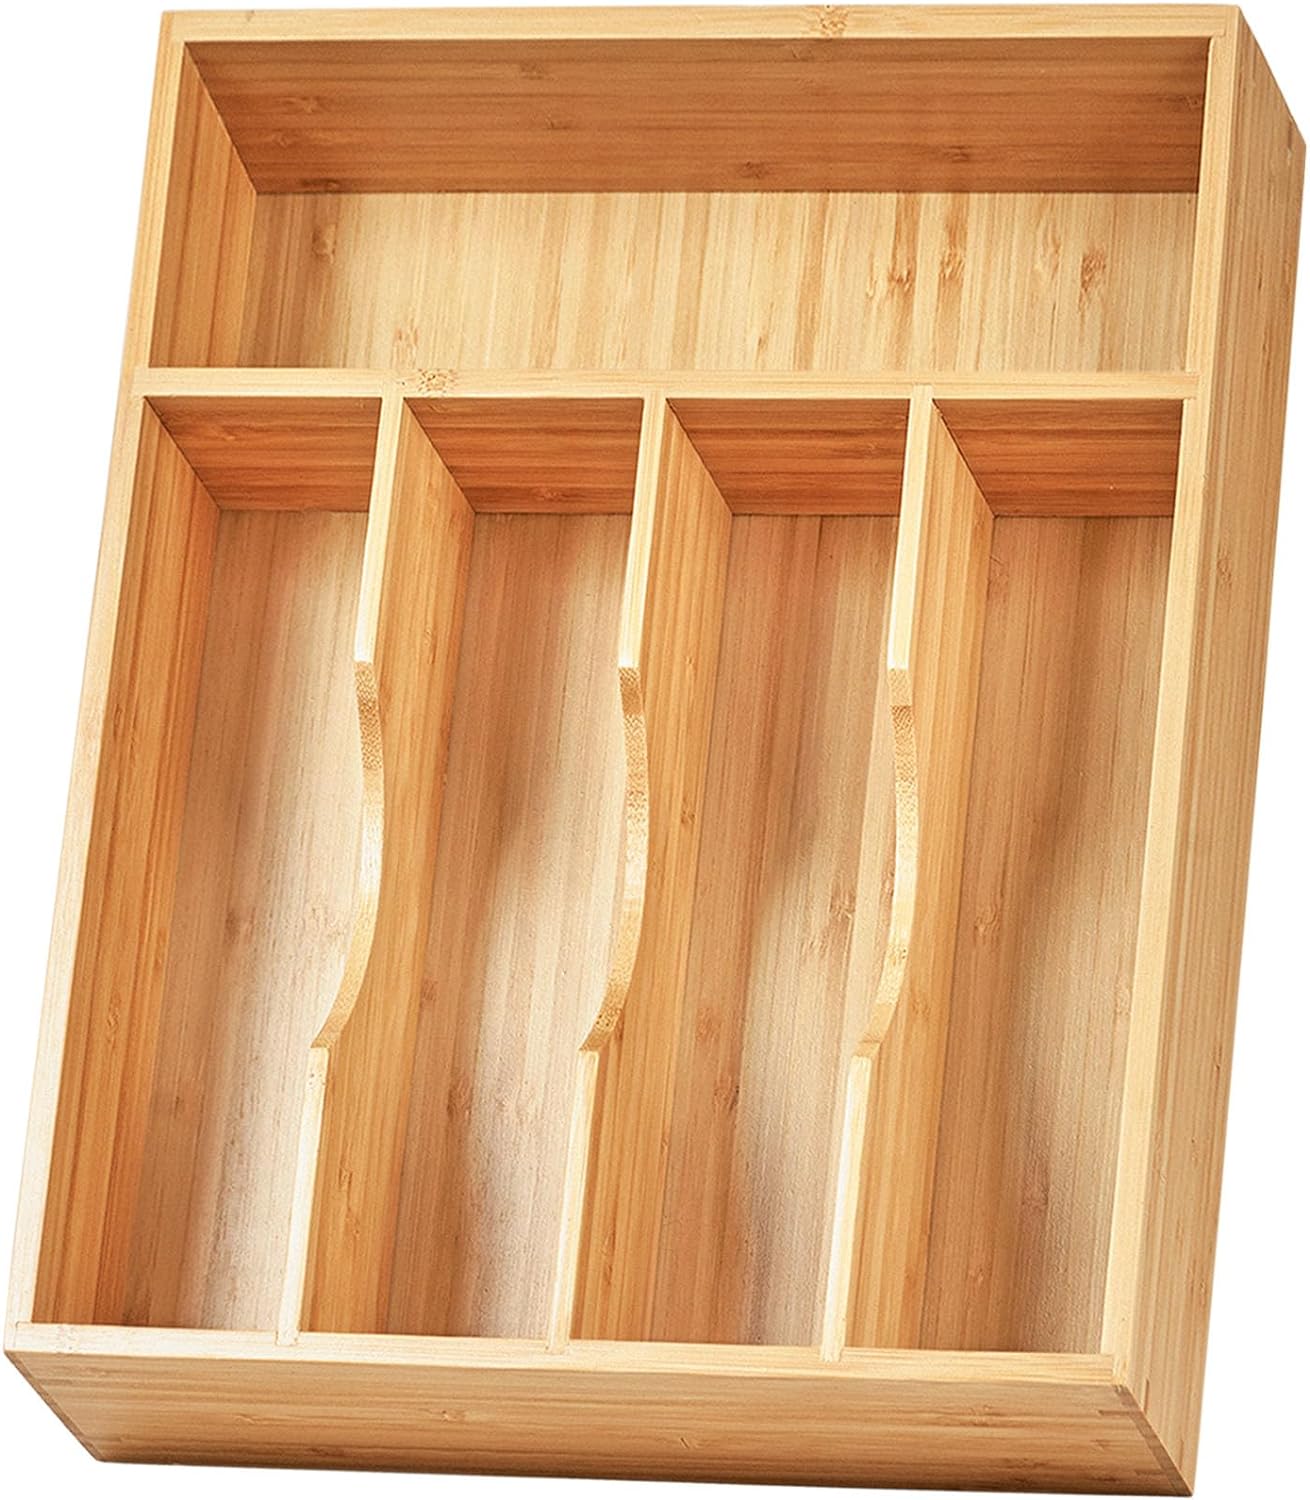 I selected this product when organizing my remodeled kitchen. I like that it has enough compartments for my knives, dinner forks, salad forks, table spoons, & soup spoons to each have their own space, & there' additional spaces for serving pieces too. It looks nice, is well made of good material, is sturdy, & fits nicely in my drawer. I am very happy with this purchase & highly recommend it.